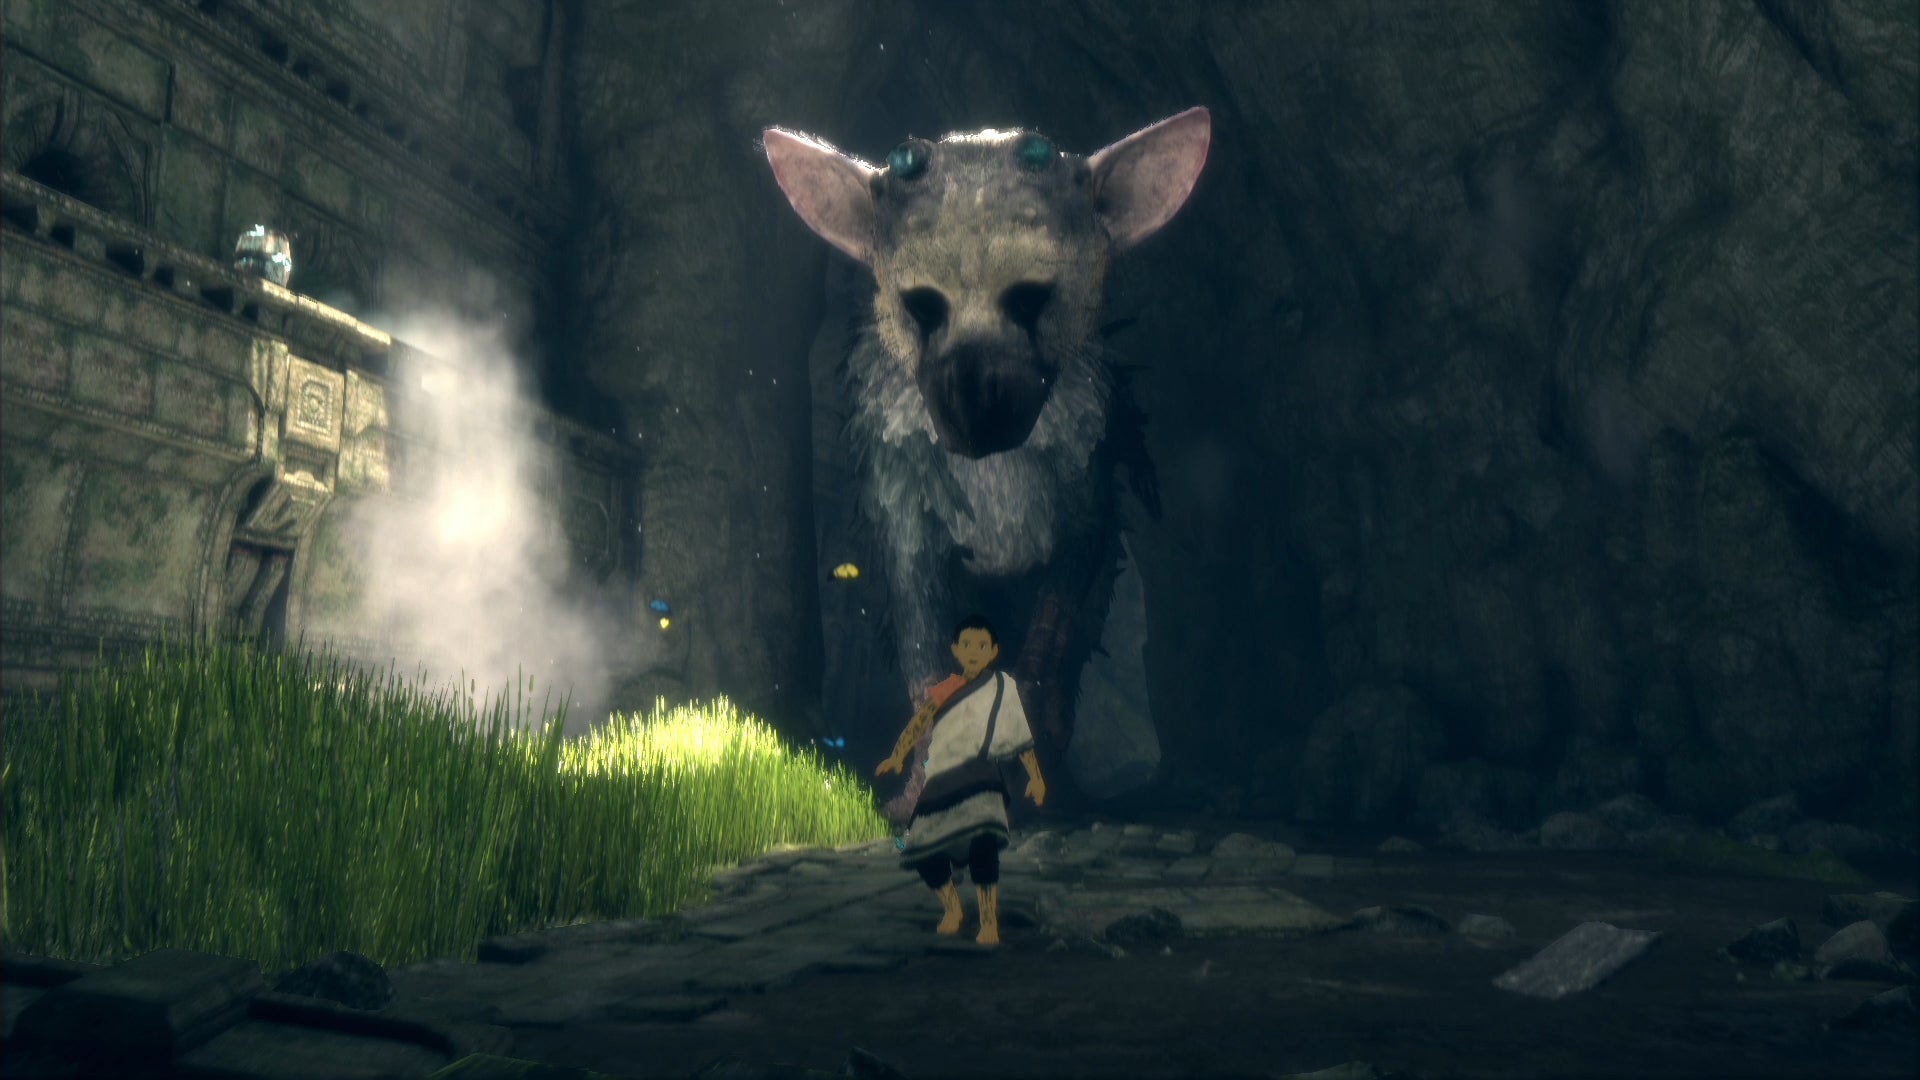 Игра the last guardian. The last Guardian. Трико зе ласт Гардиан. Трику the last Guardian. Игра the last Guardian ps4.